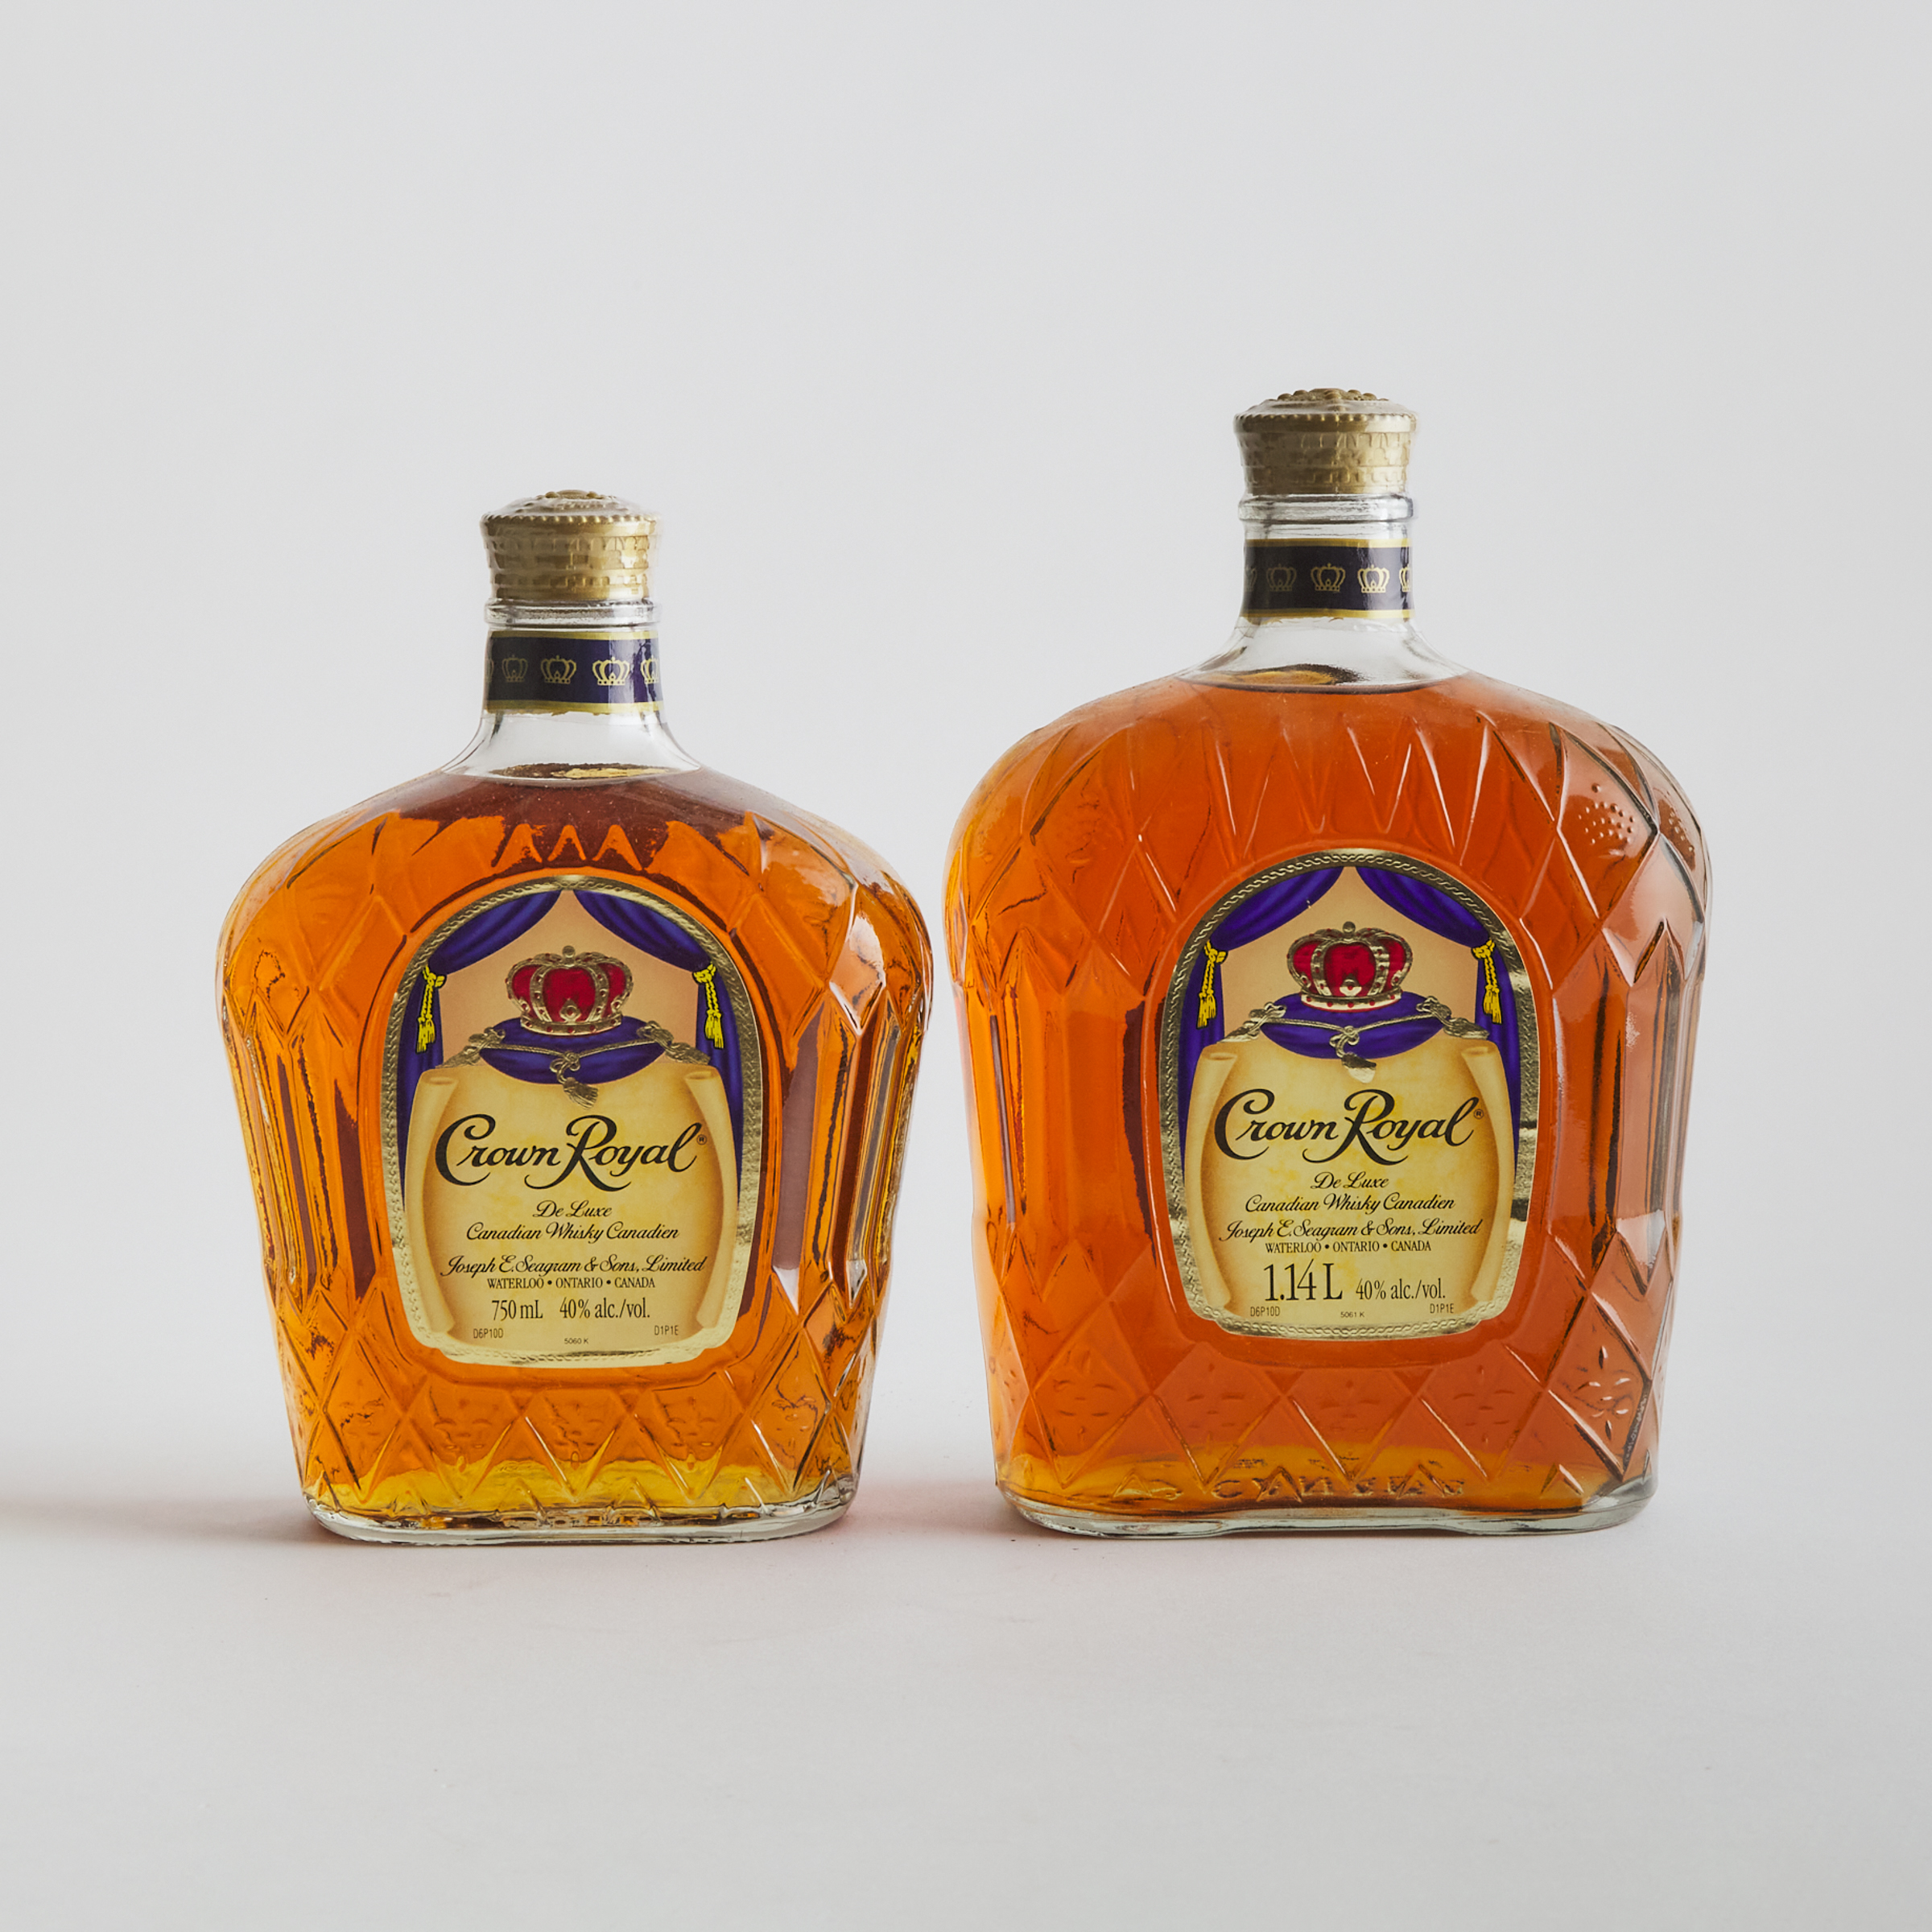 CROWN ROYAL FINE DELUXE CANADIAN WHISKY (ONE 750 ML)
CROWN ROYAL FINE DELUXE CANADIAN WHISKY (ONE 1000 ML)